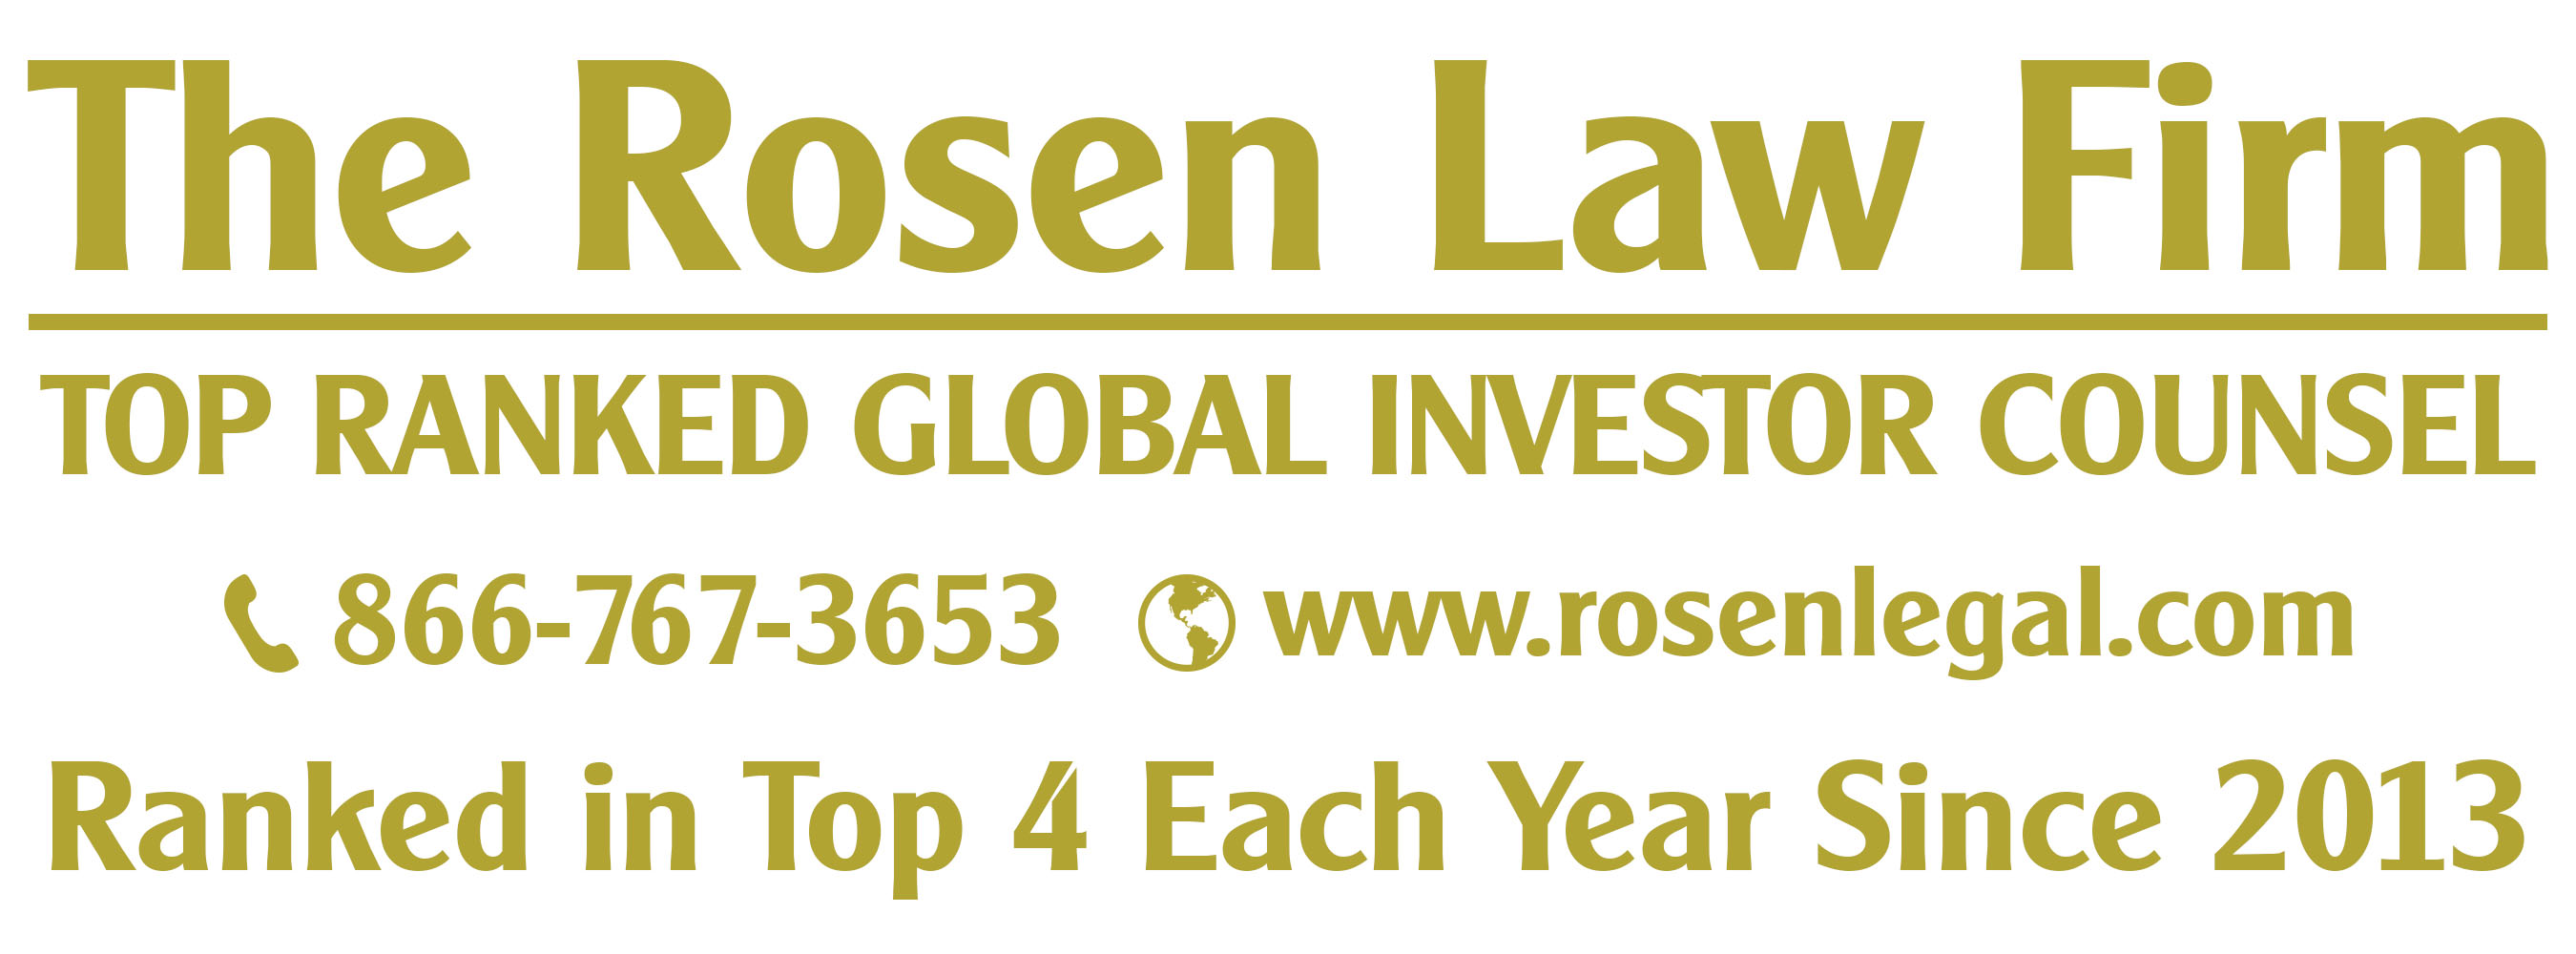 Rosen Law Firm PA, Wednesday, August 3, 2022, Press release picture